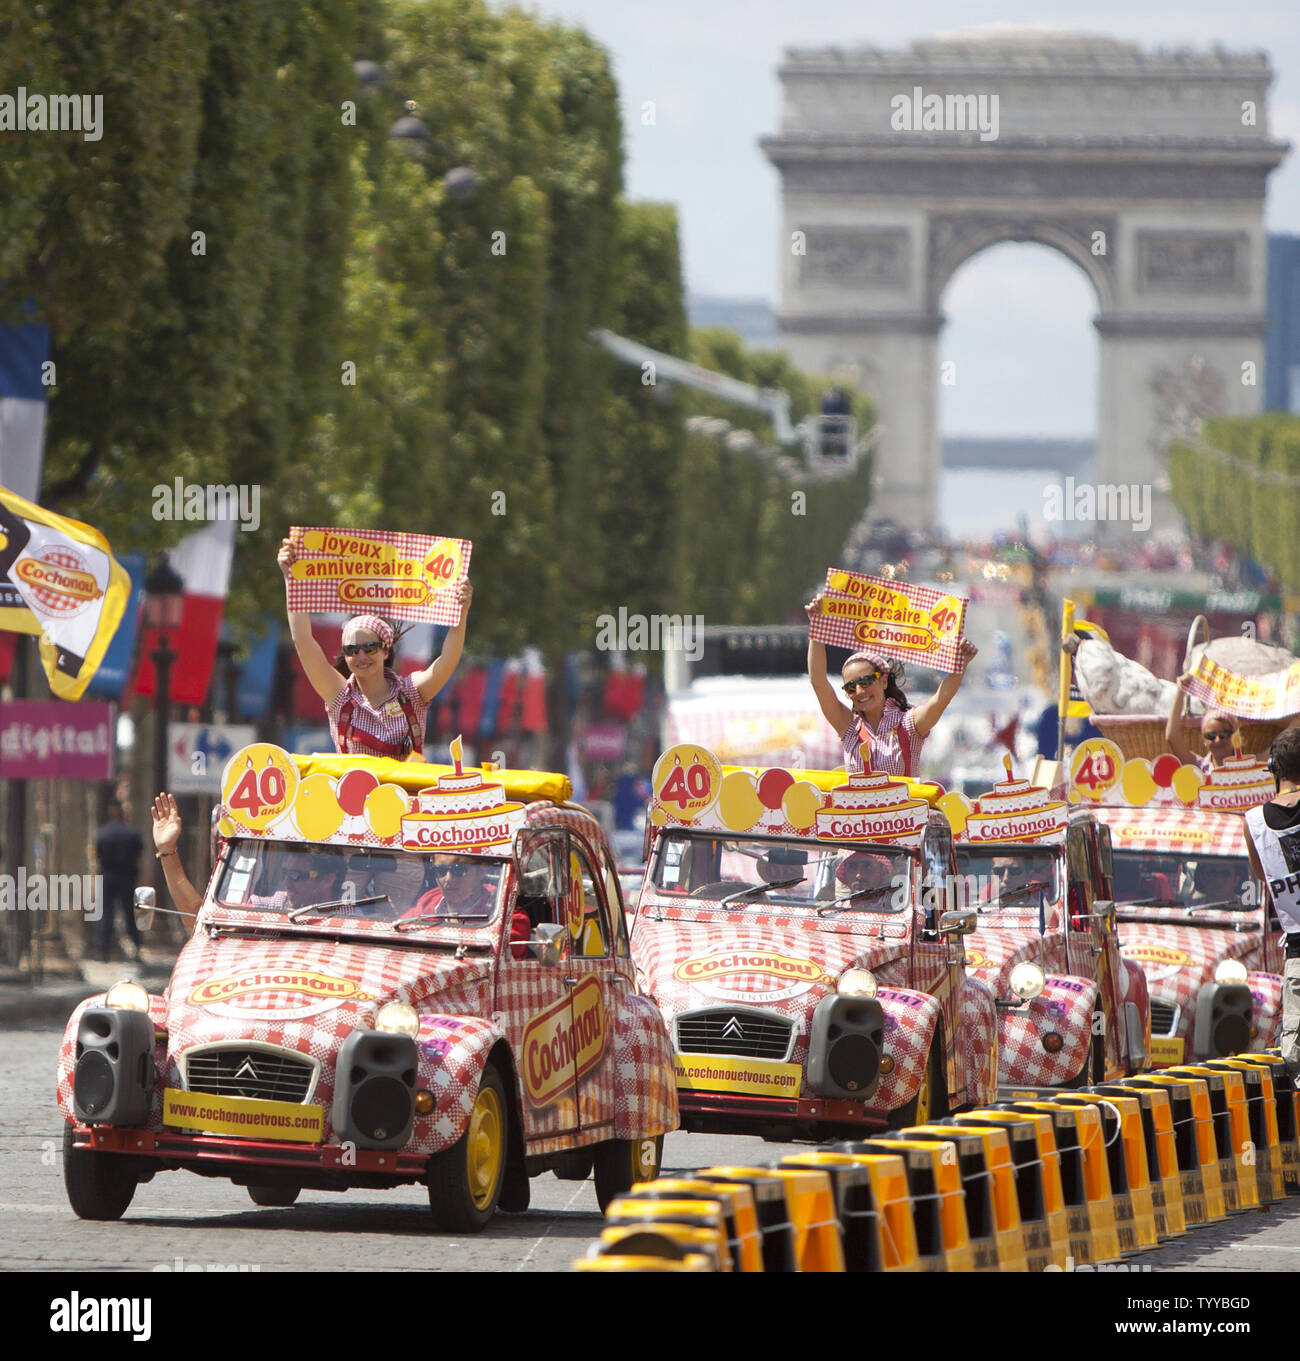 A publicity caravan drives along the Champs-Elysees before the arrival of the riders during the final stage of the Tour de France in Paris on July 24, 2011.  Cadel Evans won the event for the first time, becoming the first Australian to do so.   UPI/David Silpa Stock Photo